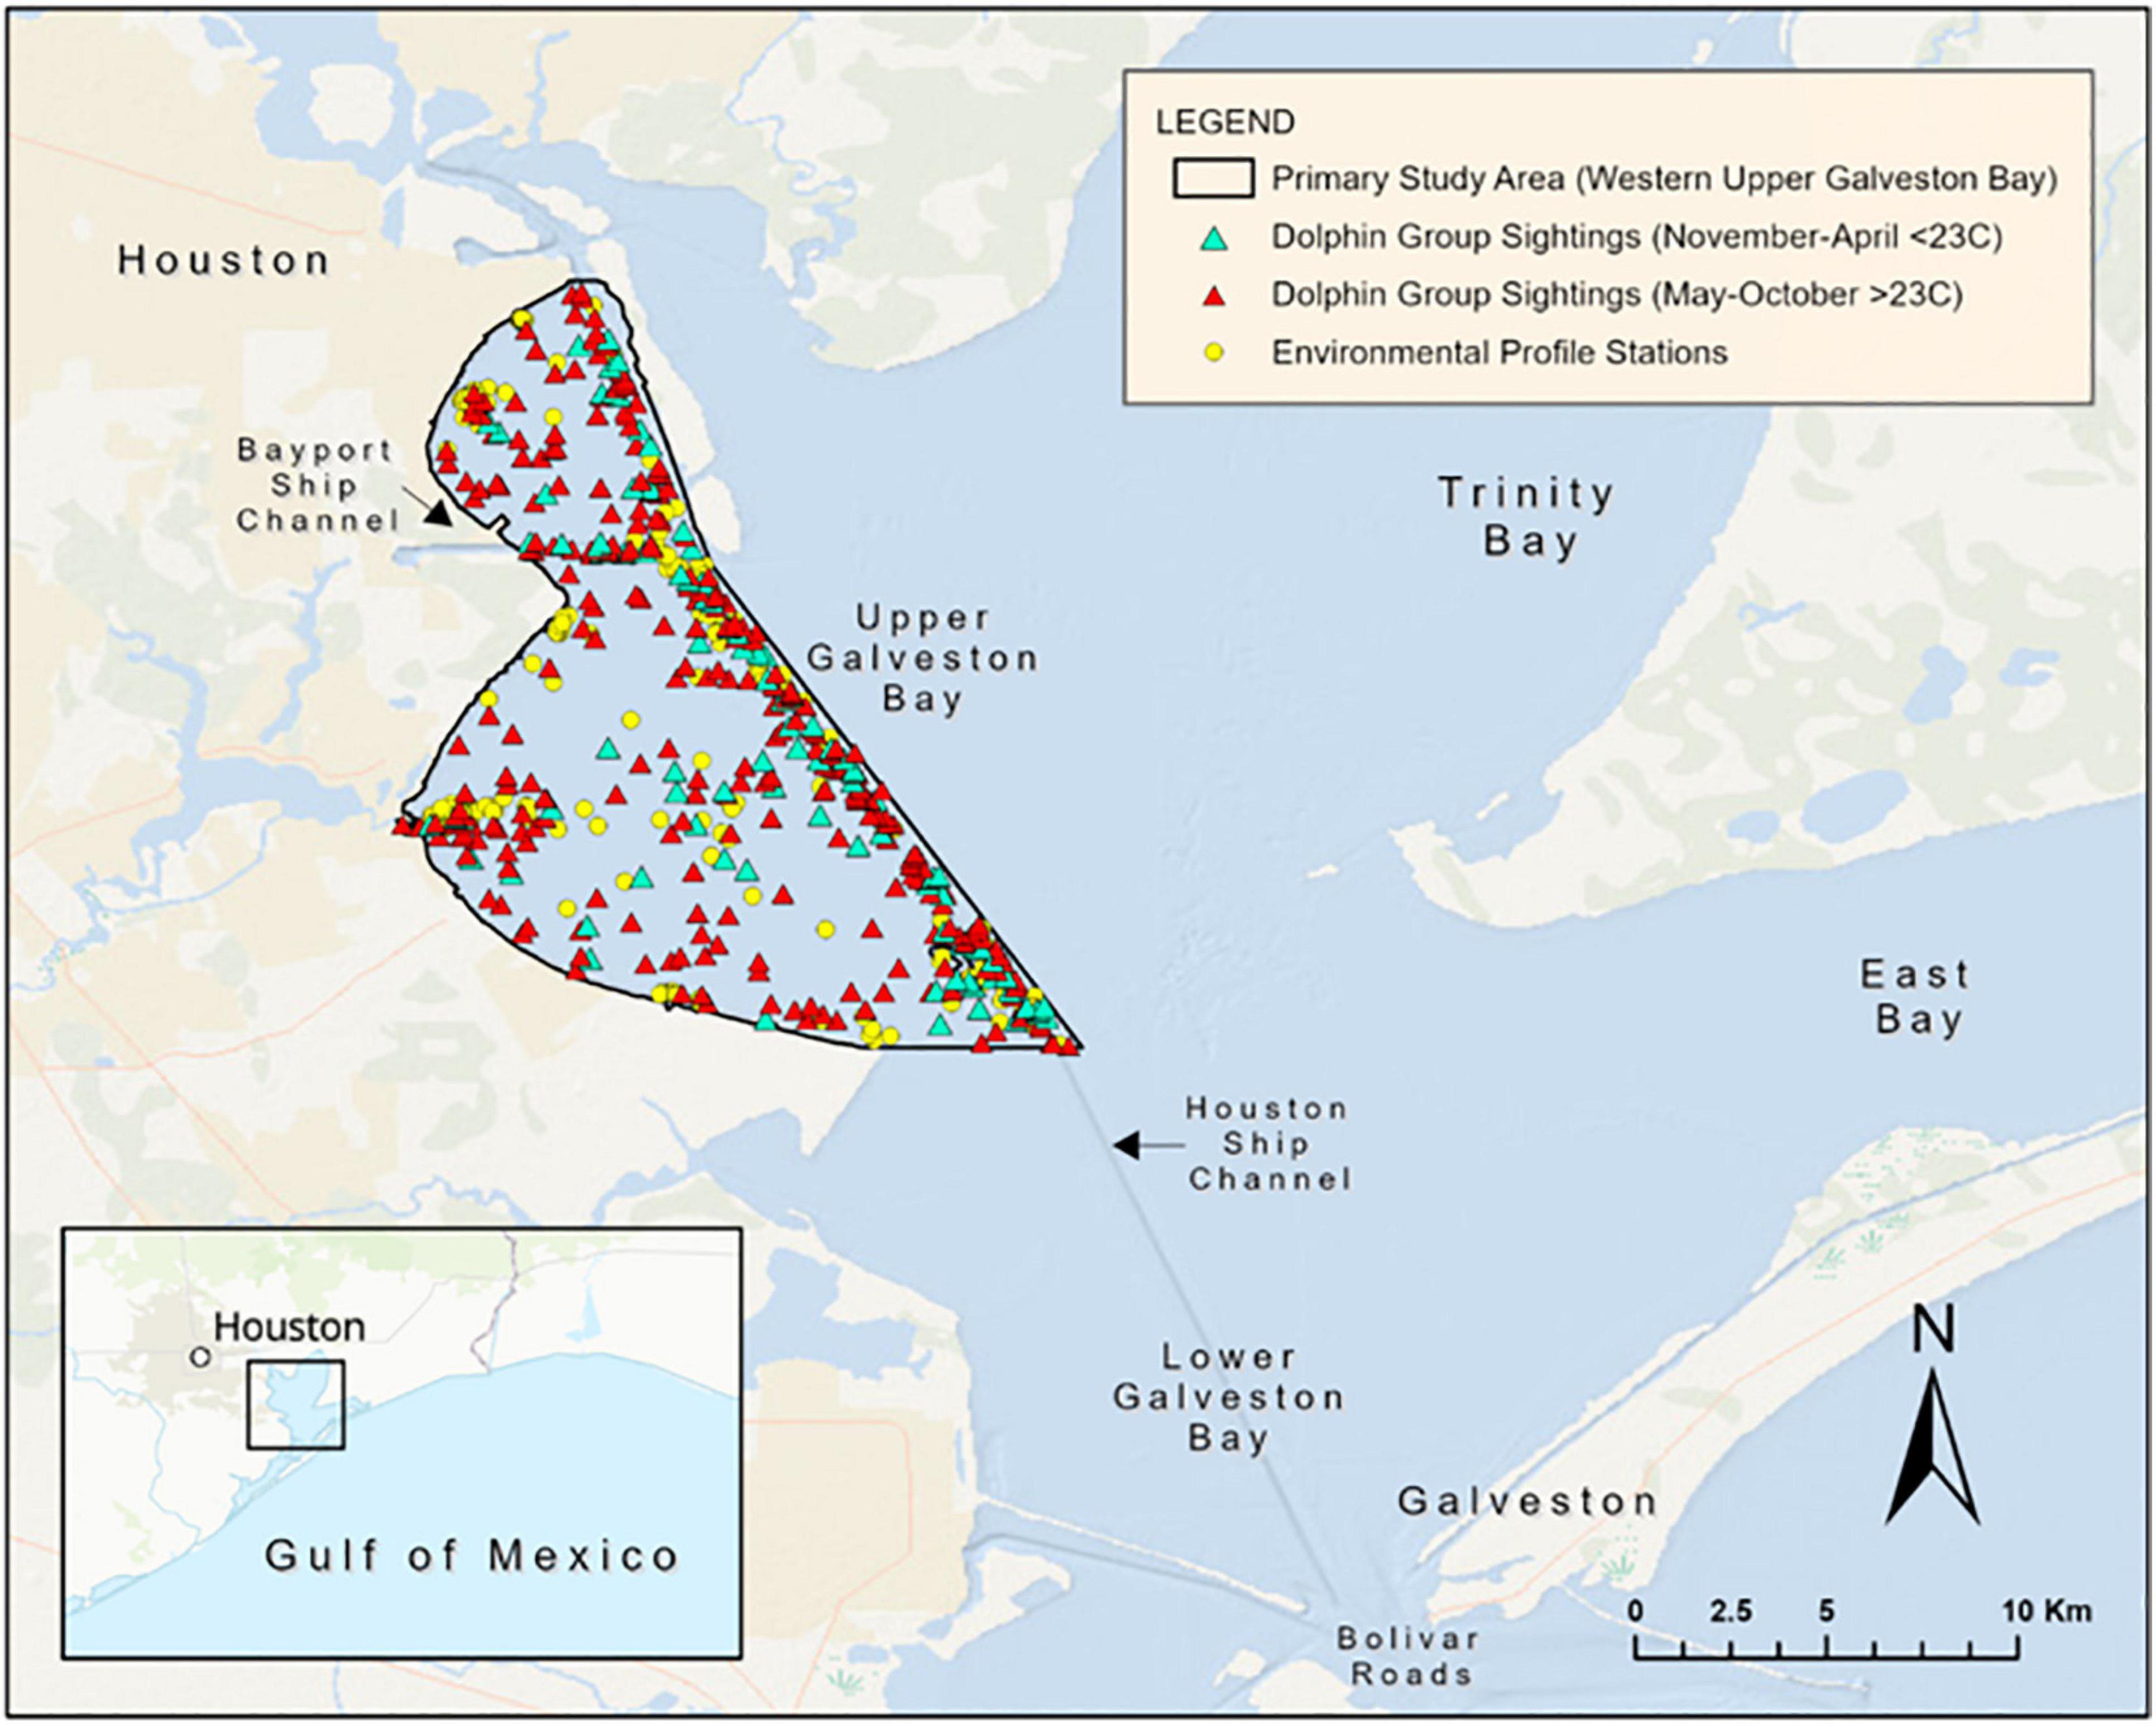 Frontiers  Salinity and Water Temperature as Predictors of Bottlenose  Dolphin (Tursiops truncatus) Encounter Rates in Upper Galveston Bay, Texas